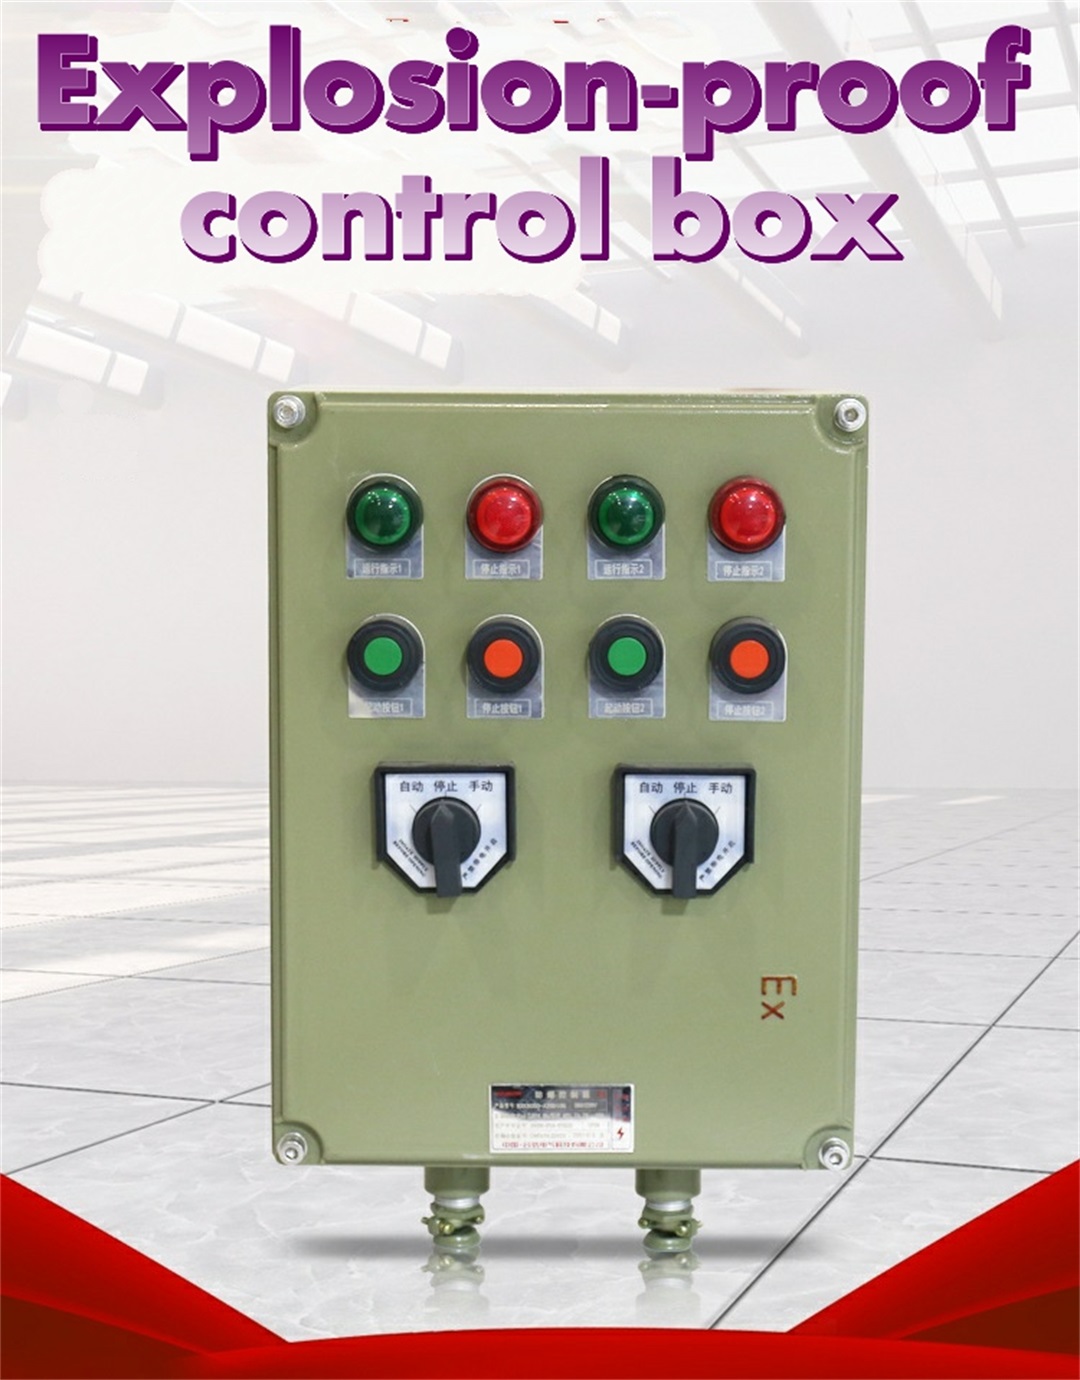 Explosion-proof power distribution device series